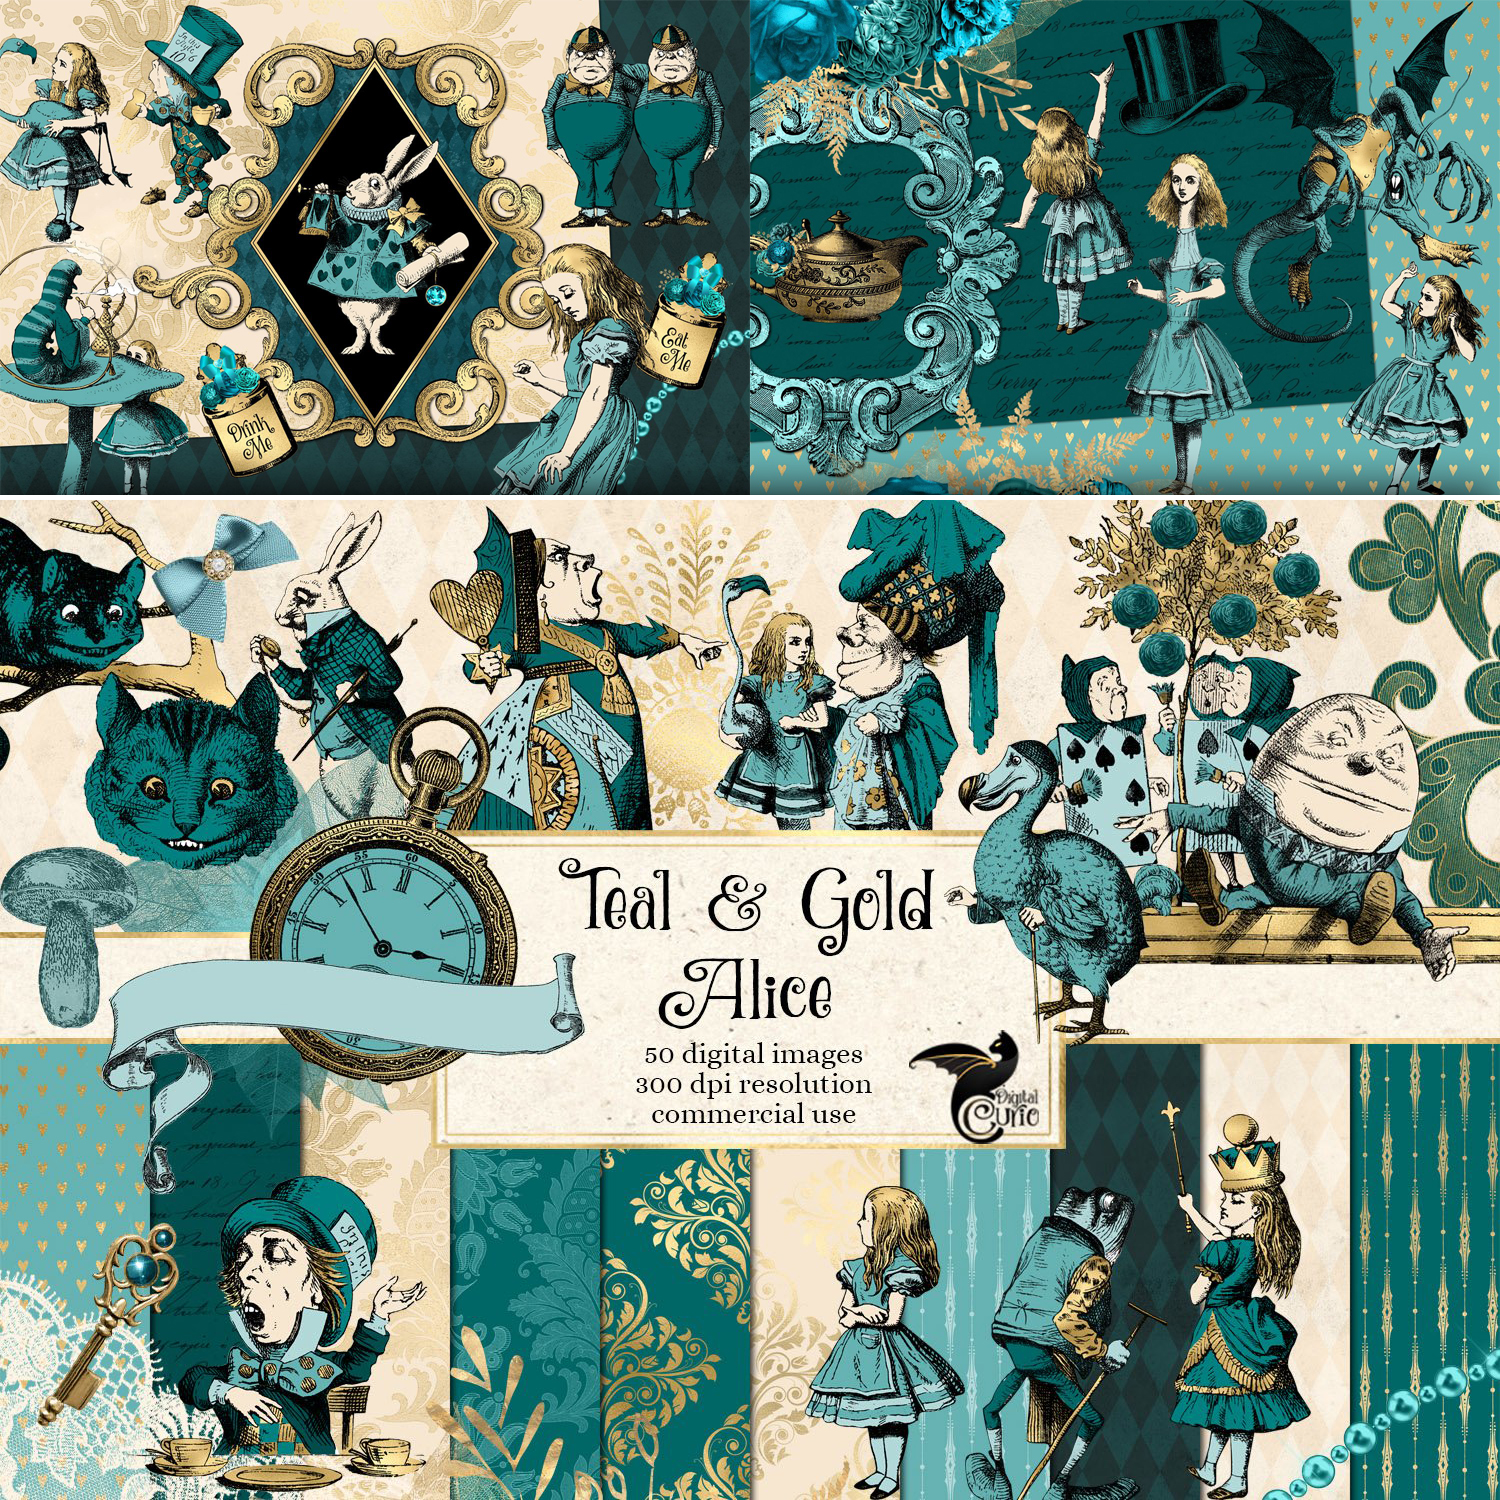 Prints of teal and gold alice in wonderland graphics.